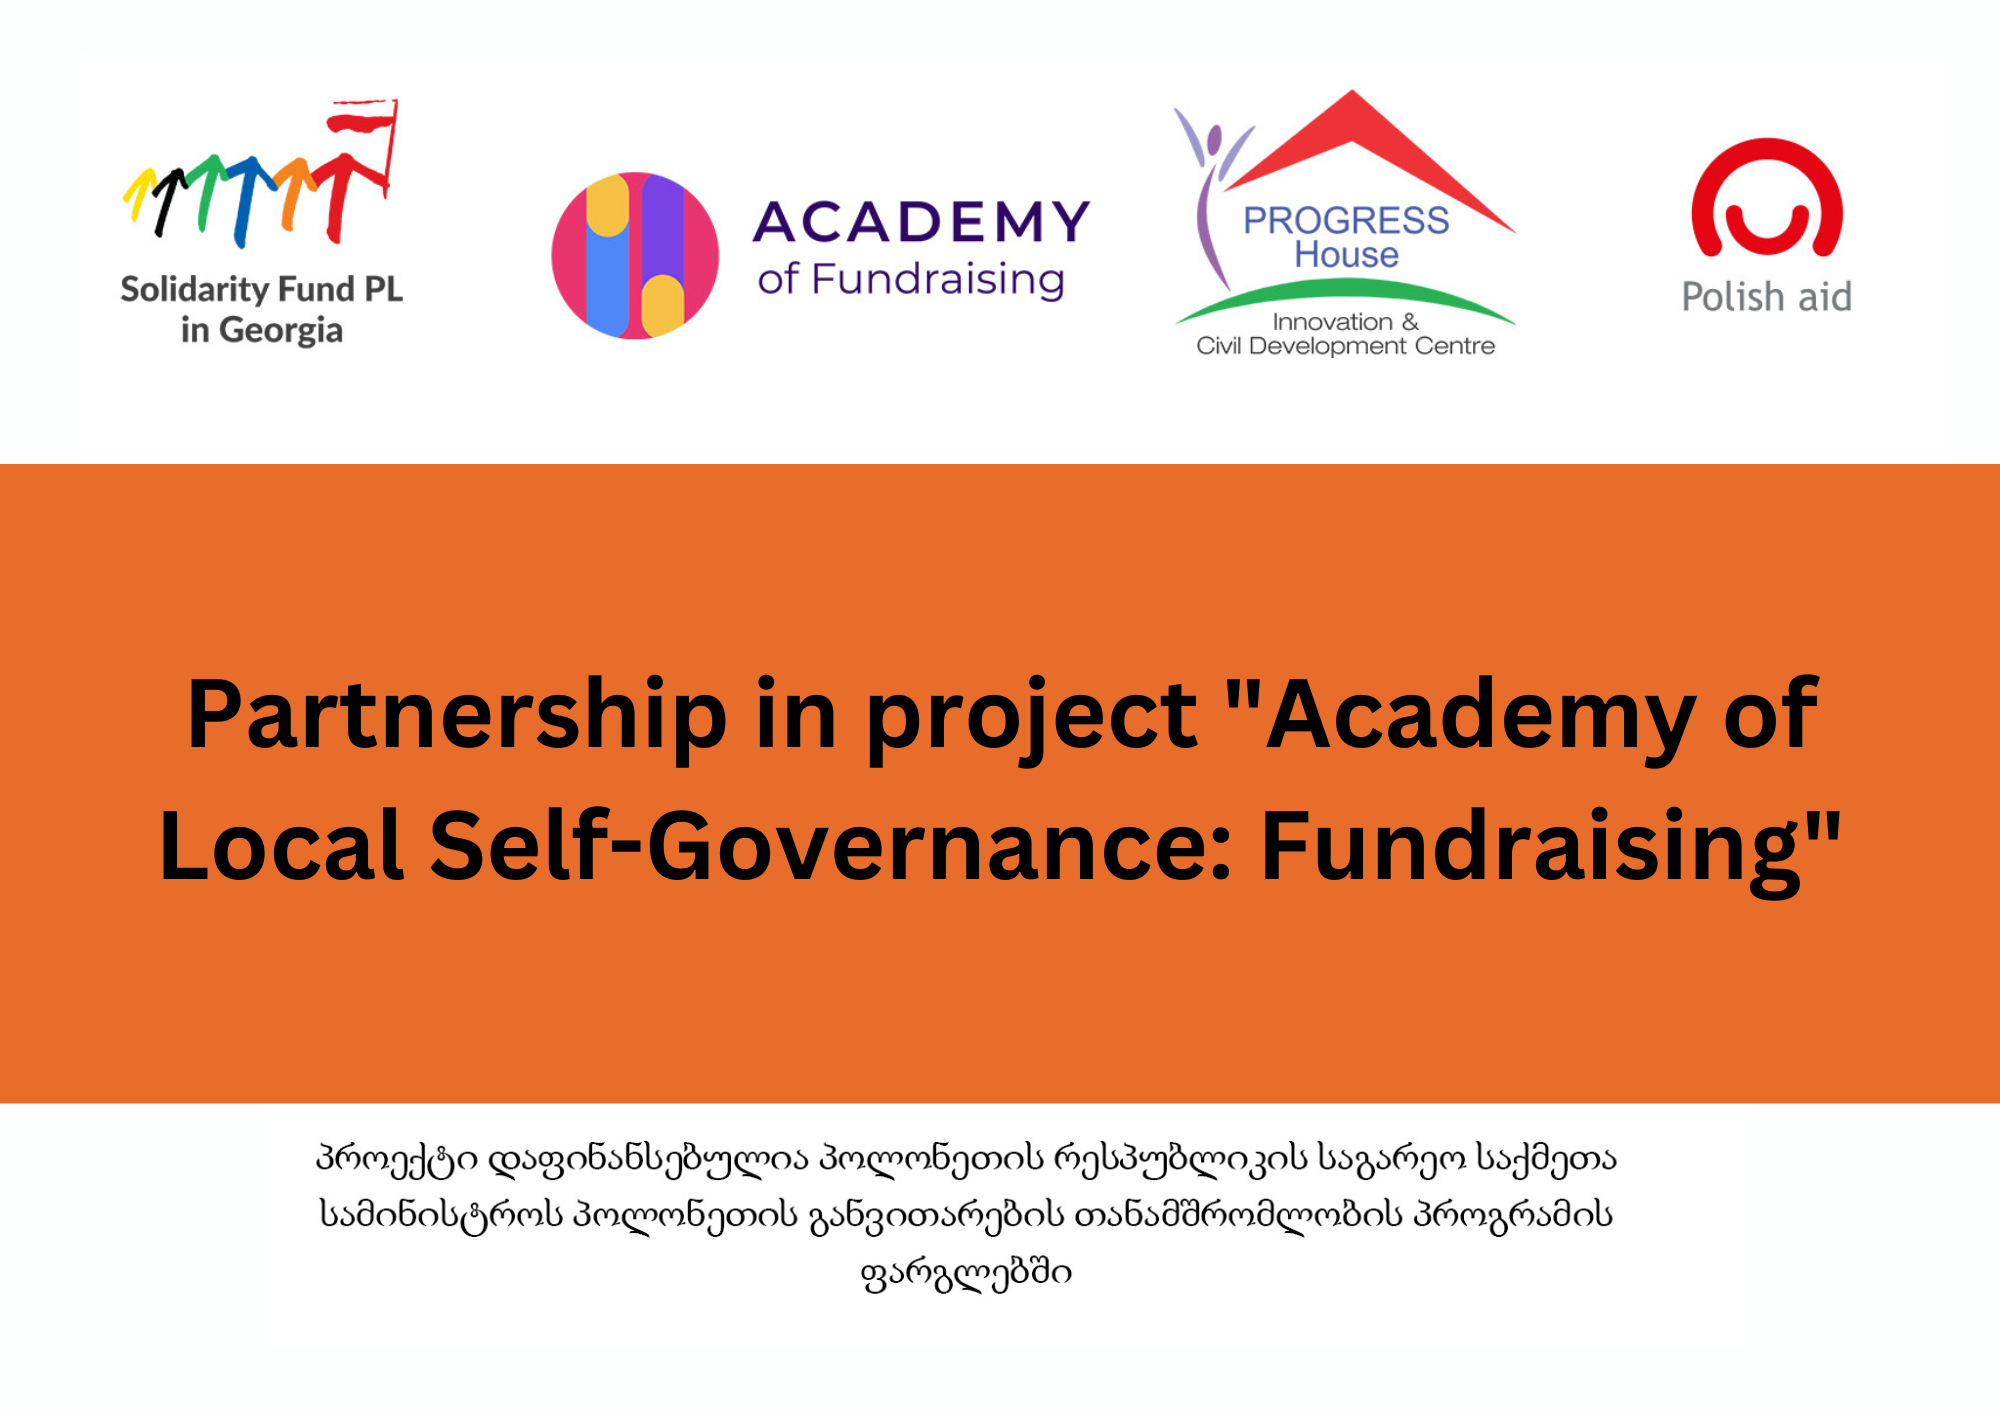 Partnership in project “Academy of Local Self-Governance: Fundraising”